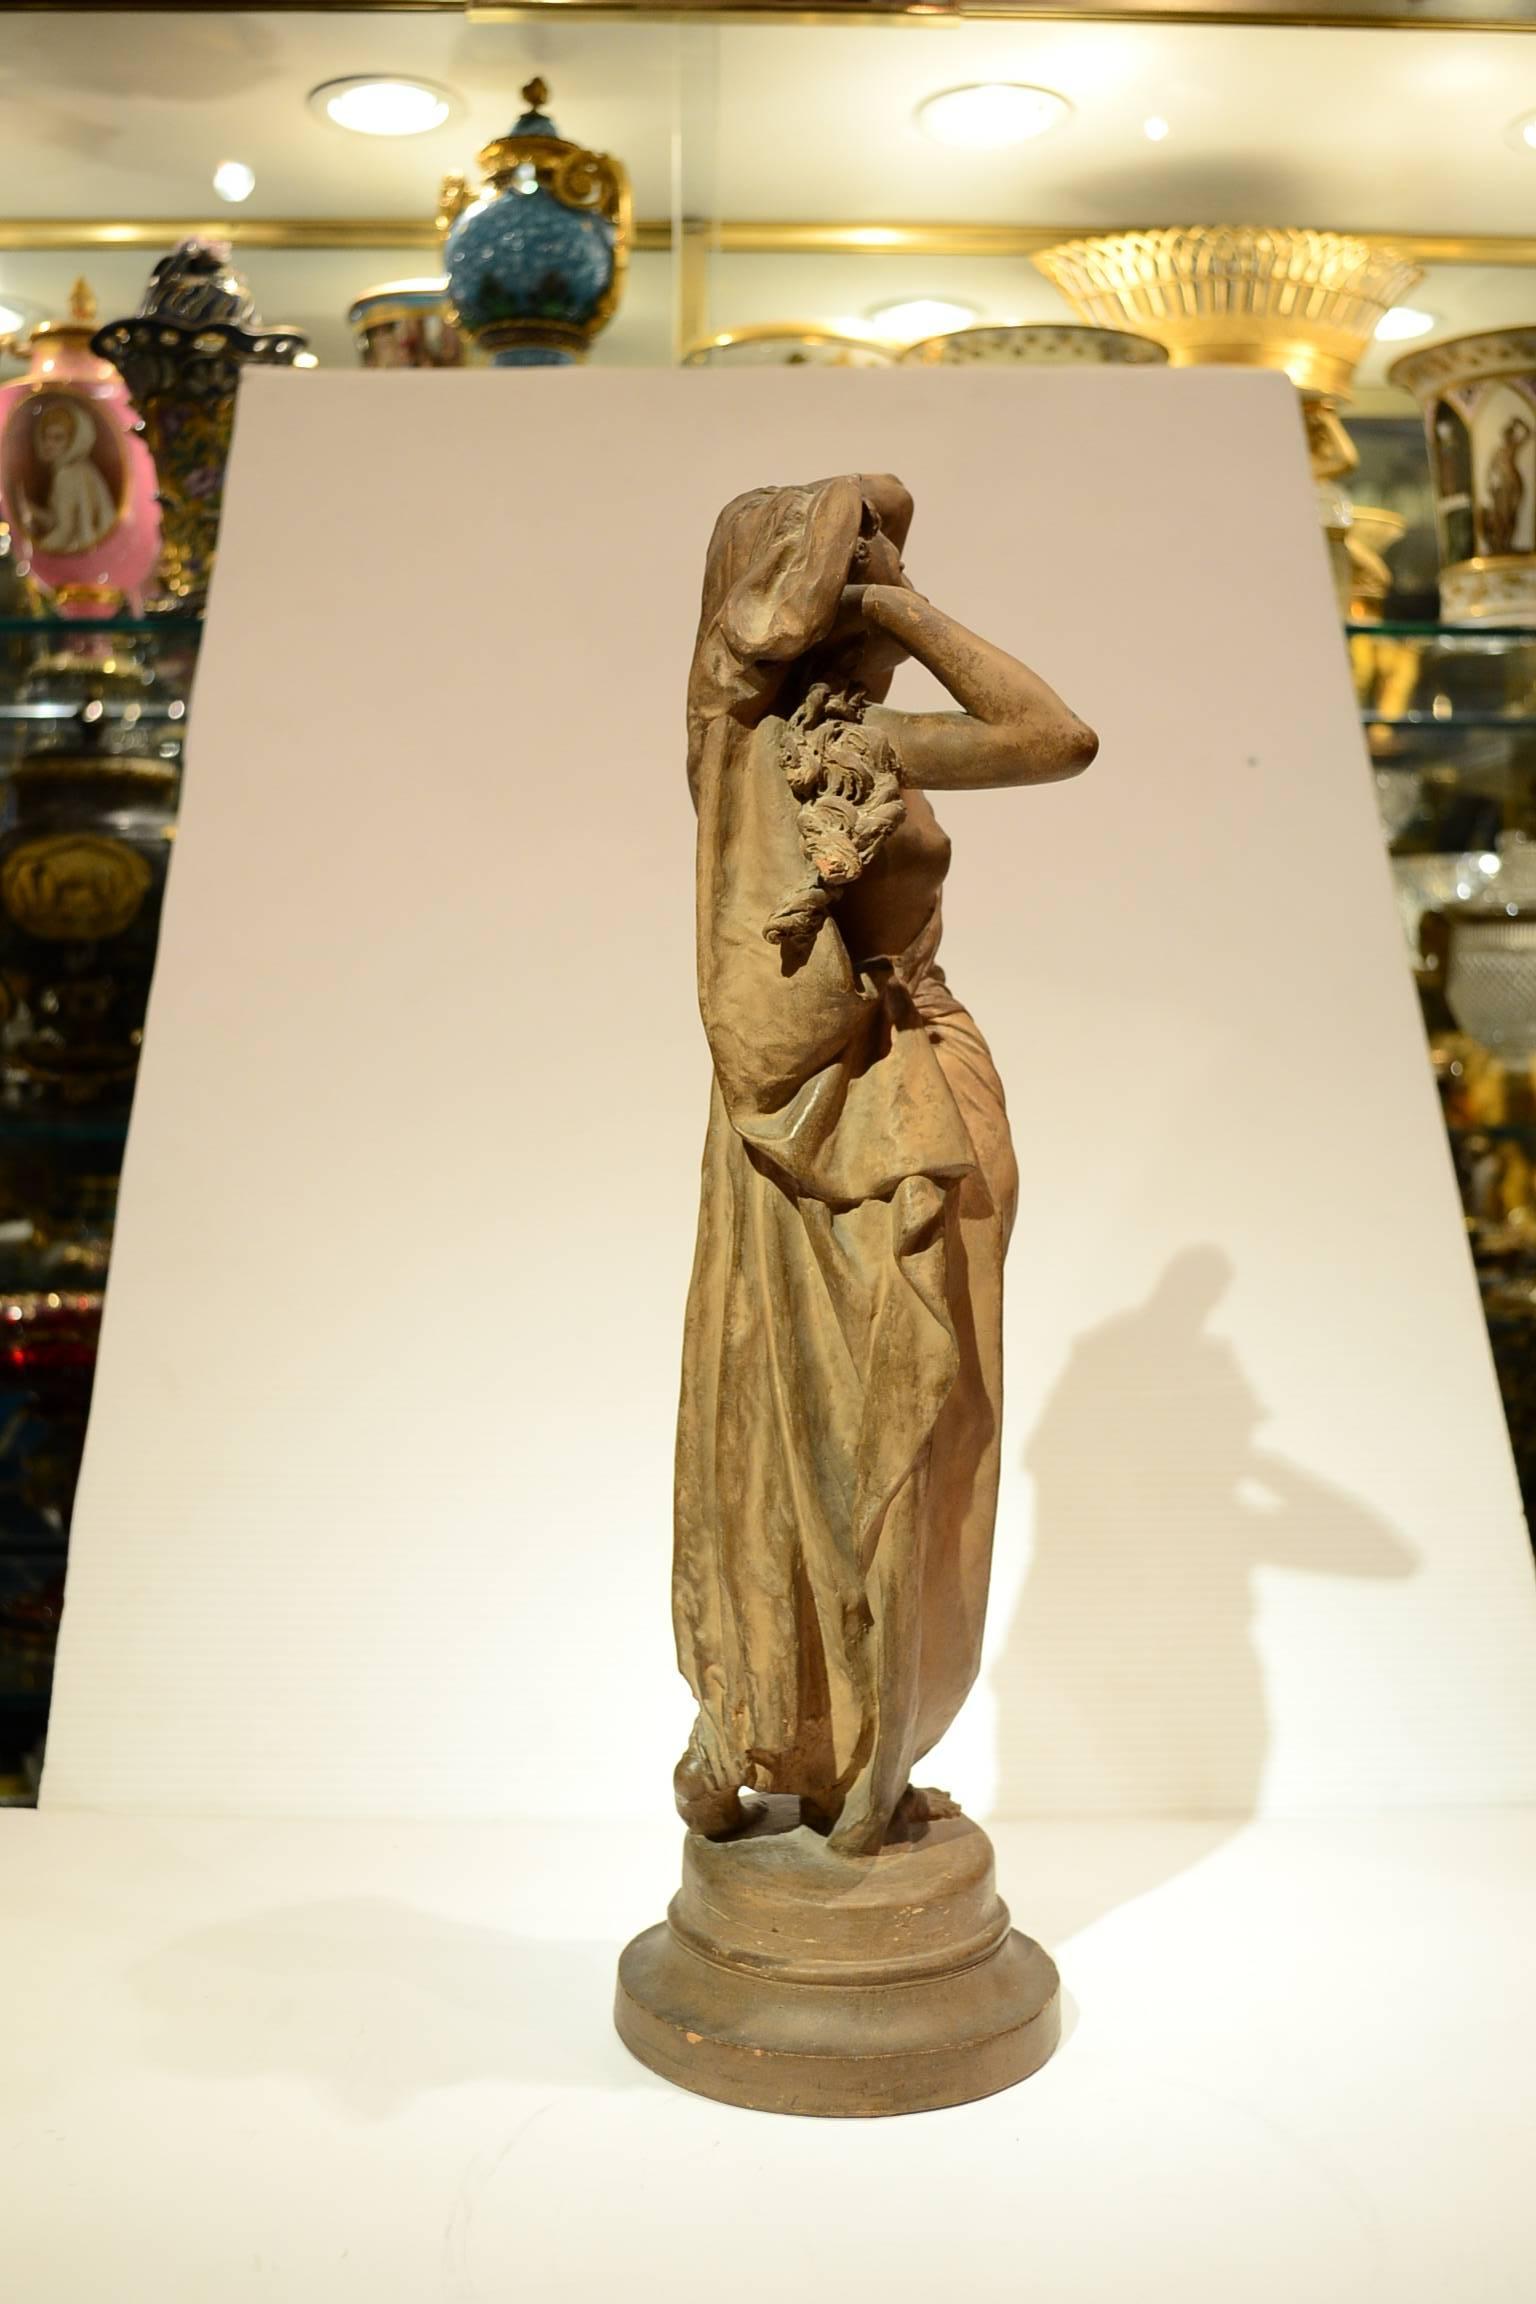 Terracotta standing nude Maiden signed A. Carrier Belleuse.

Carrier-Belleuse was born on 12 June 1824 at Anizy-le-Château, Aisne, France. He began his training as a goldsmith's apprentice.[1] Carrier-Belleuse was a student of David d'Angers and